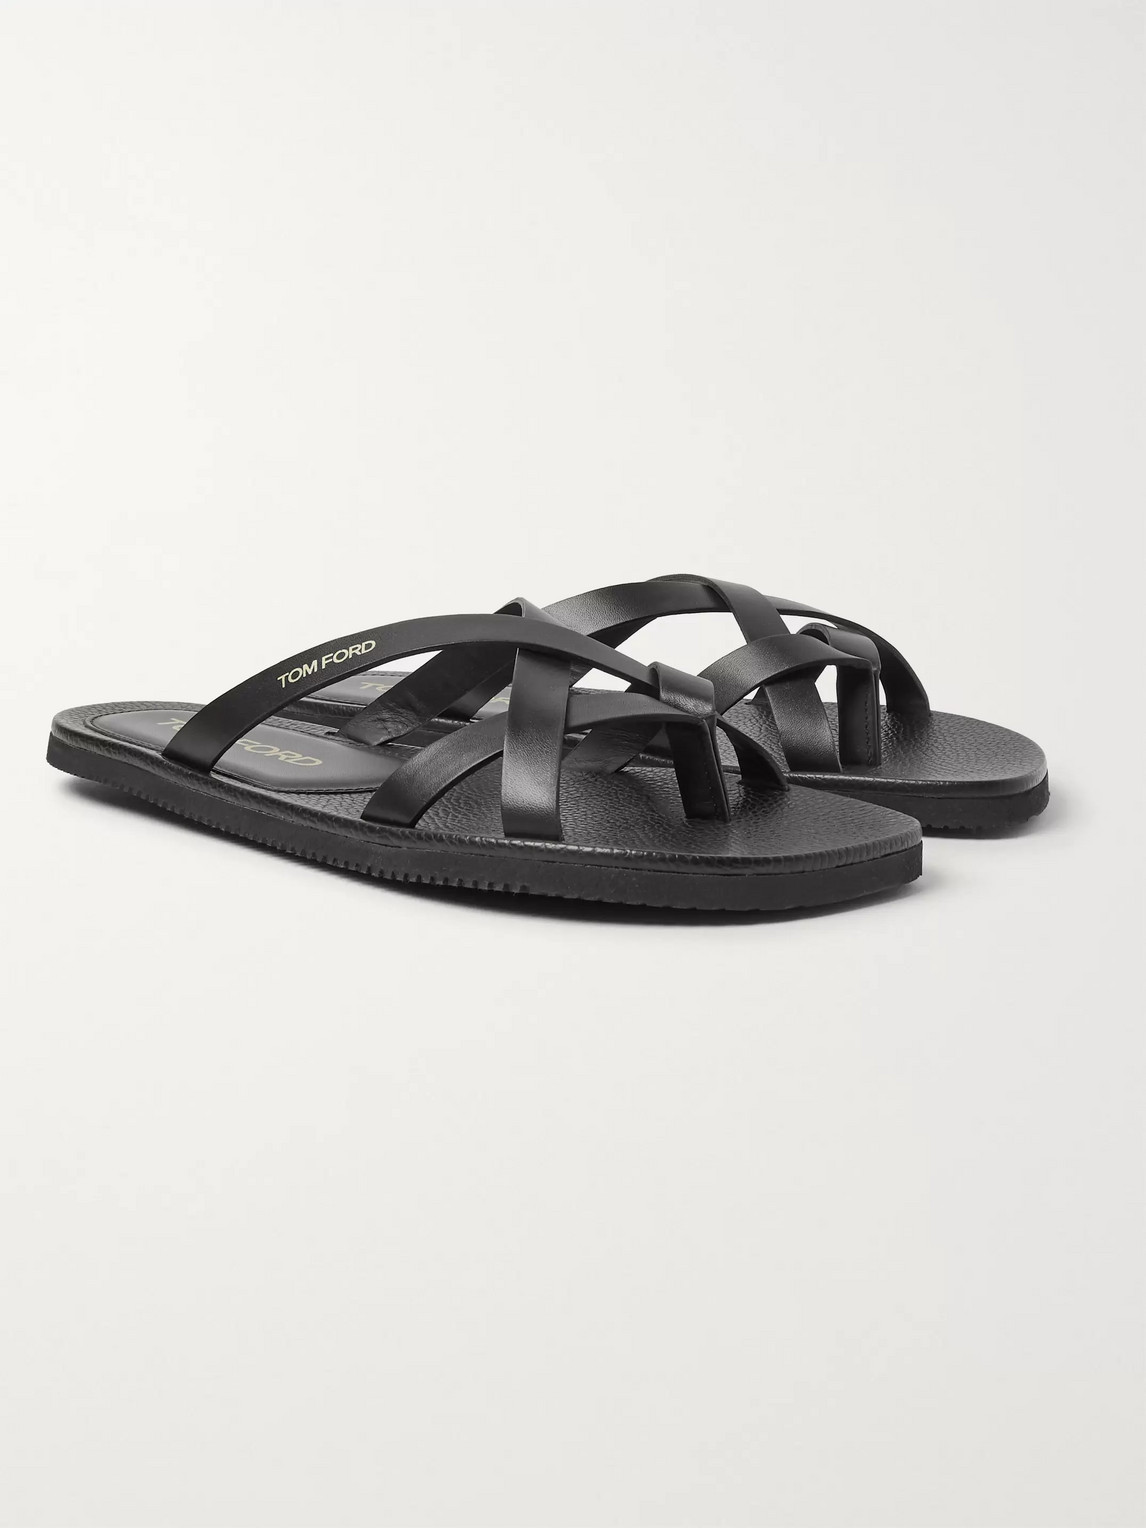 Tom Ford Seafield Leather Sandals In Black